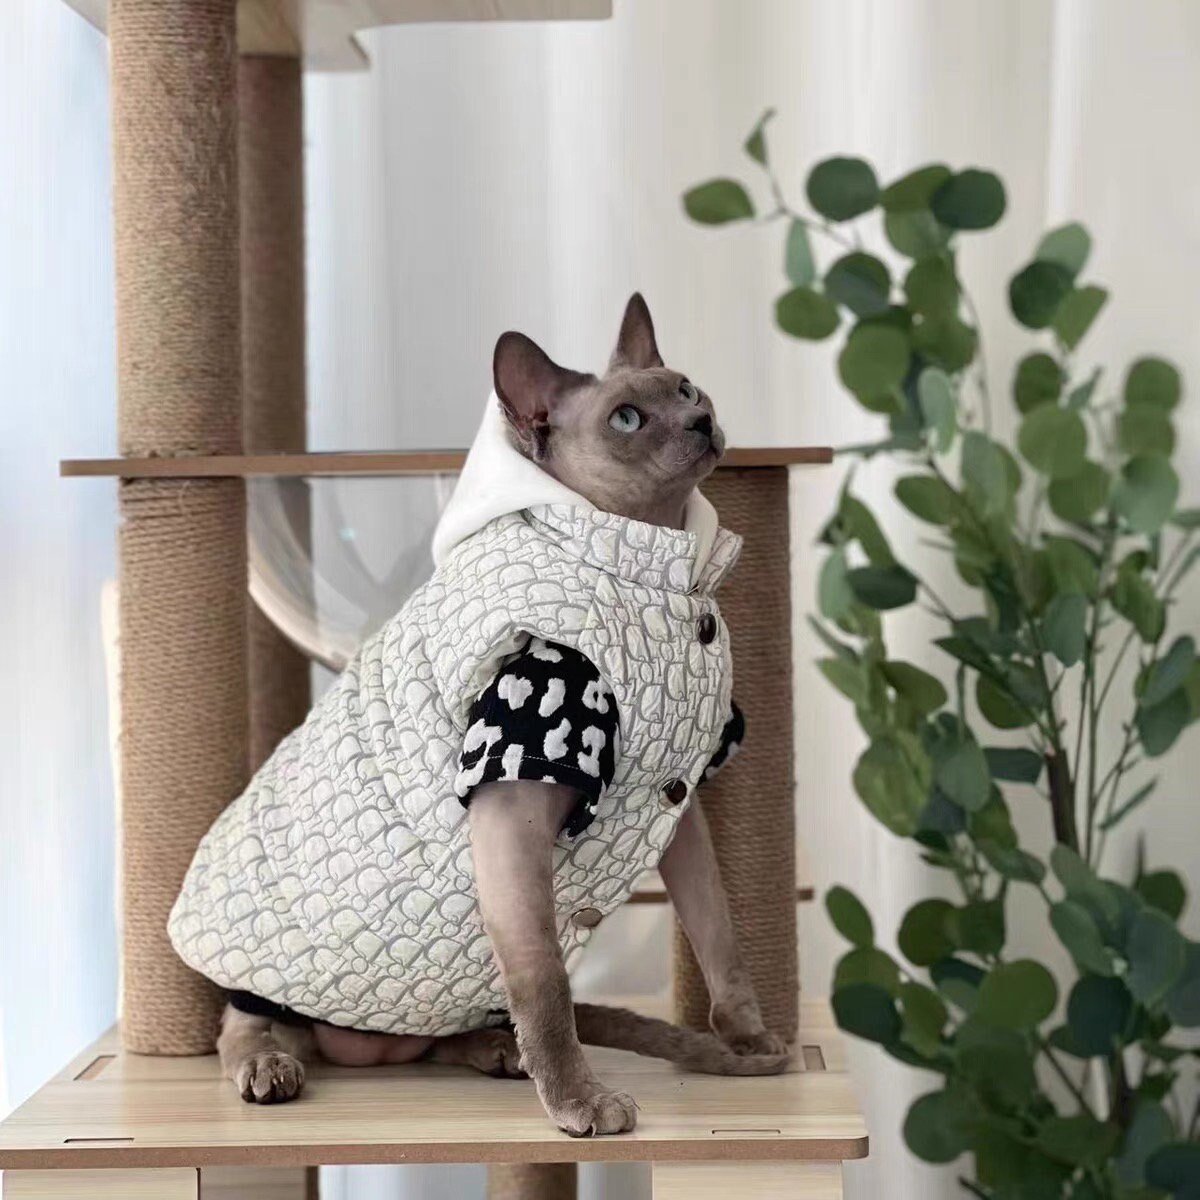 Luxury Knitted Cat Winter Coat  Fashionable Designer Cat Clothes